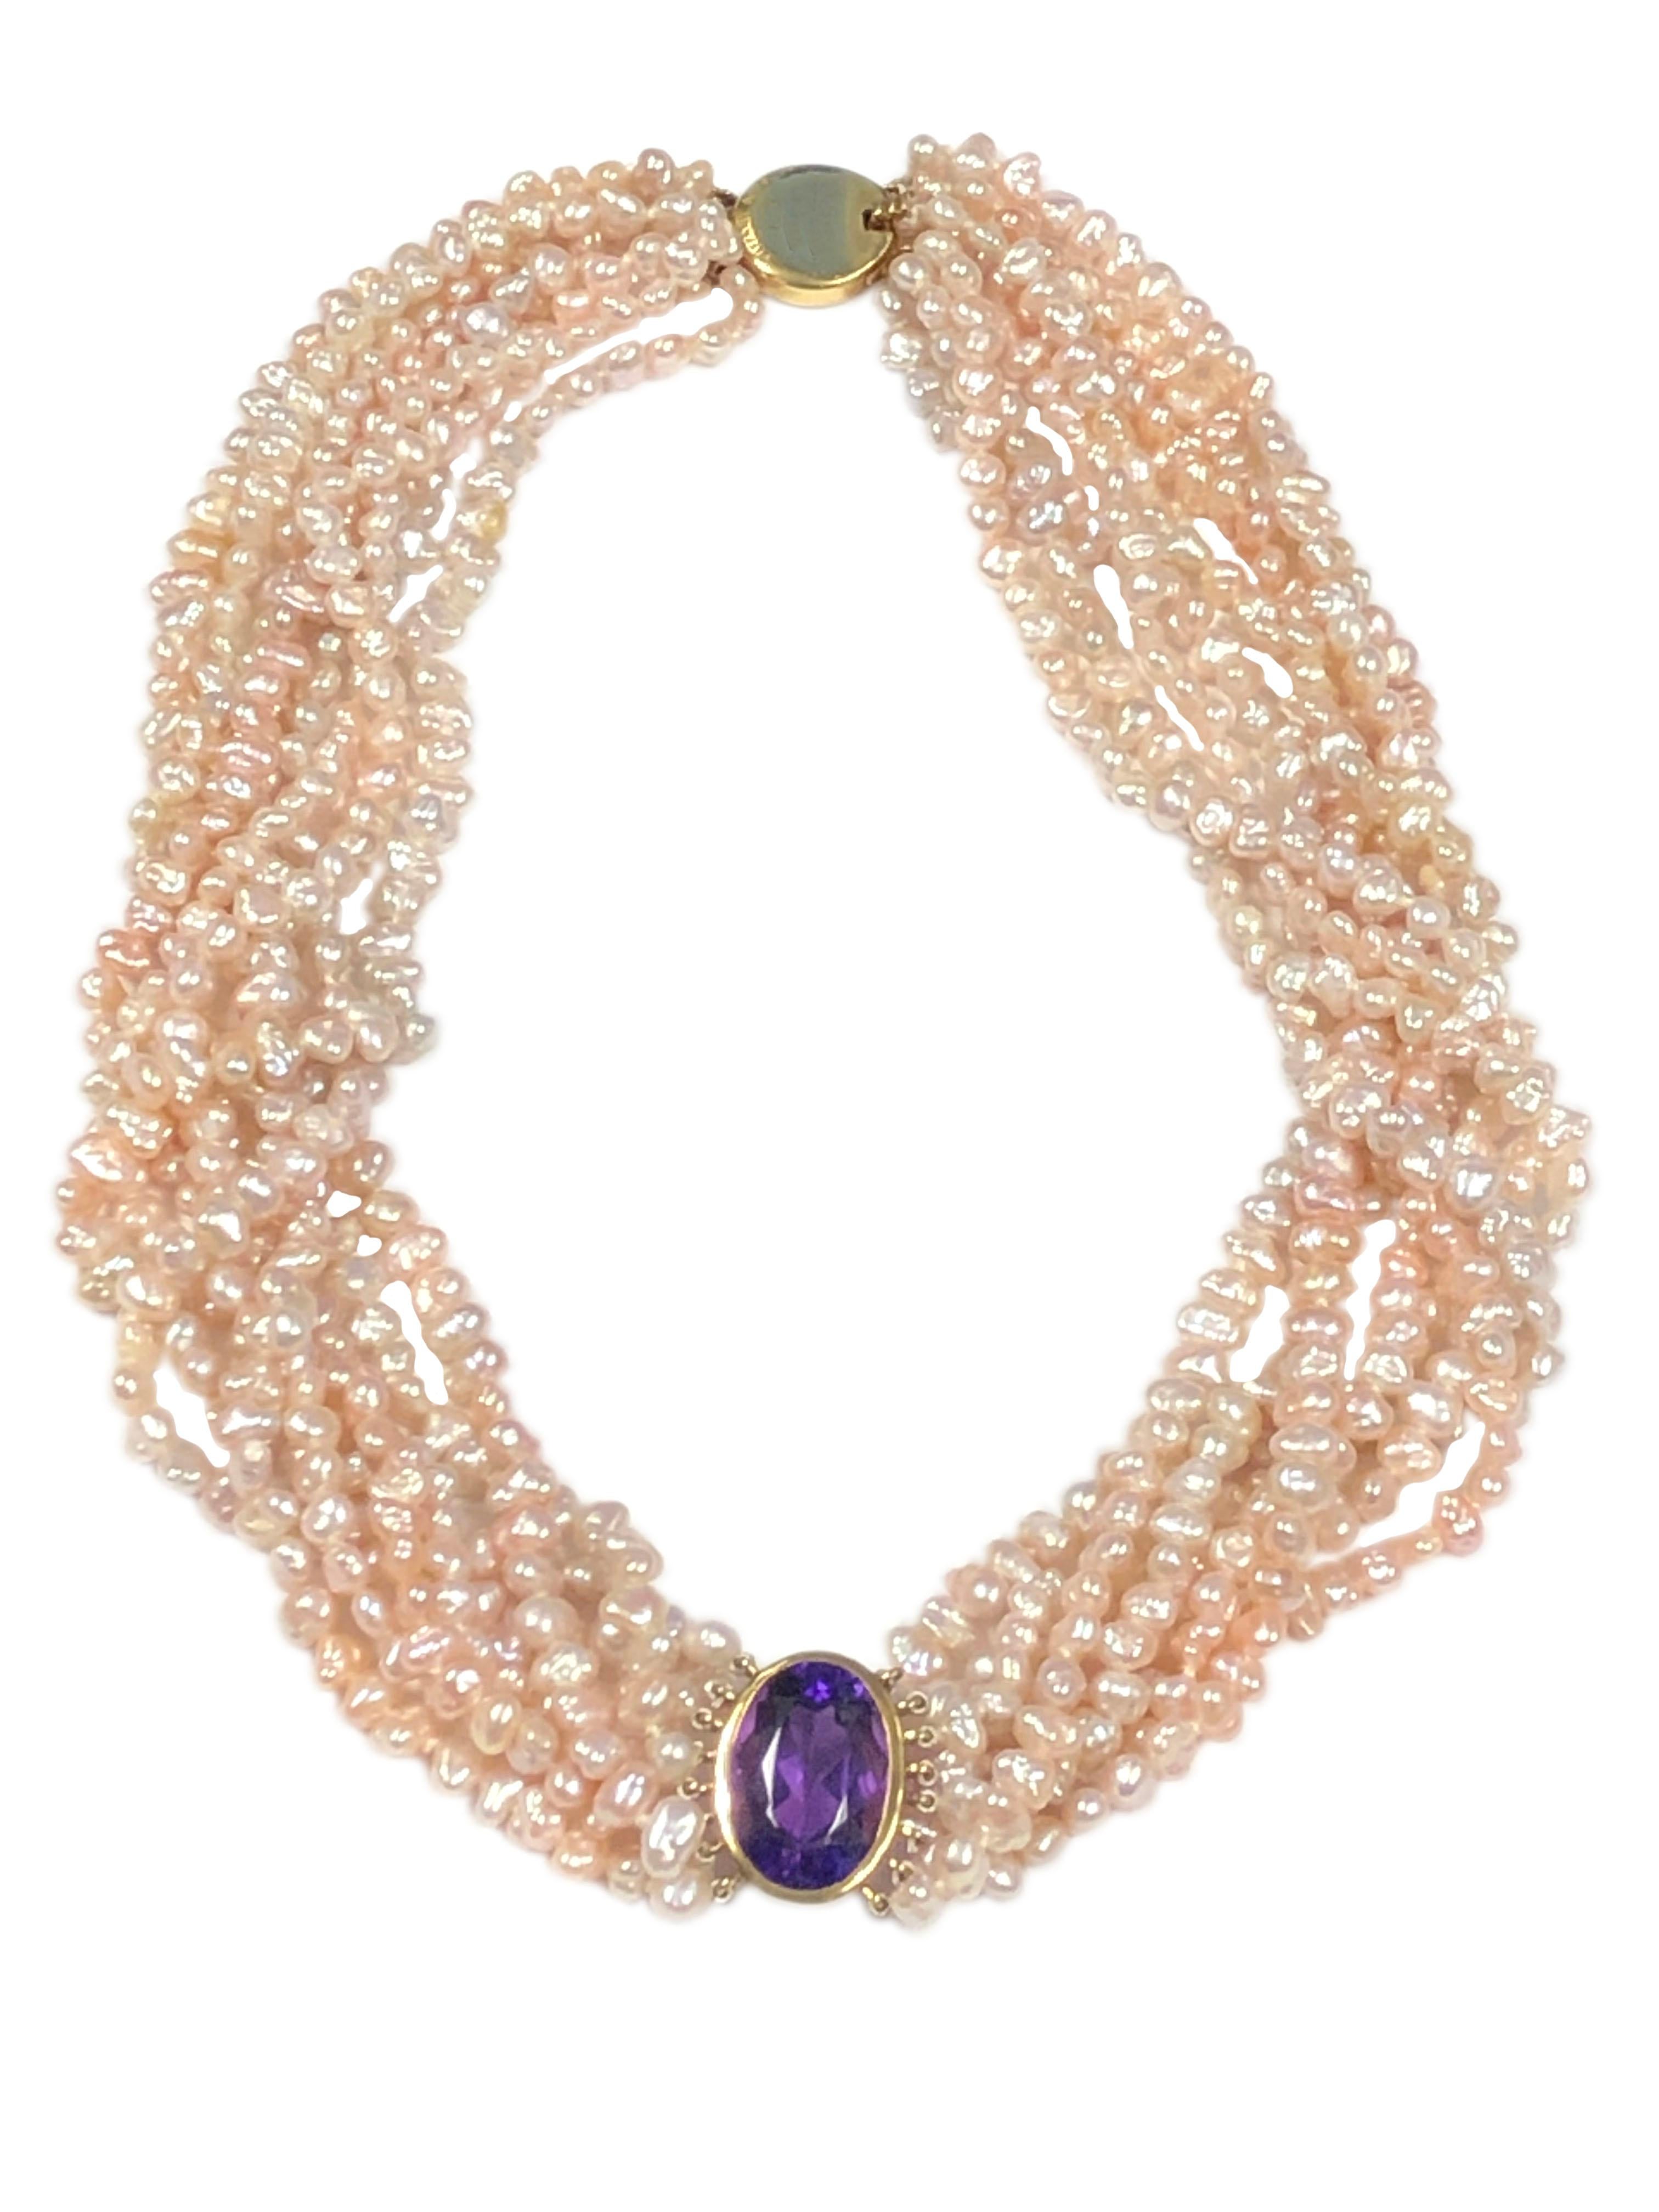 Tiffany & Company Gold Amethyst and Pearl Torasde Necklace 1